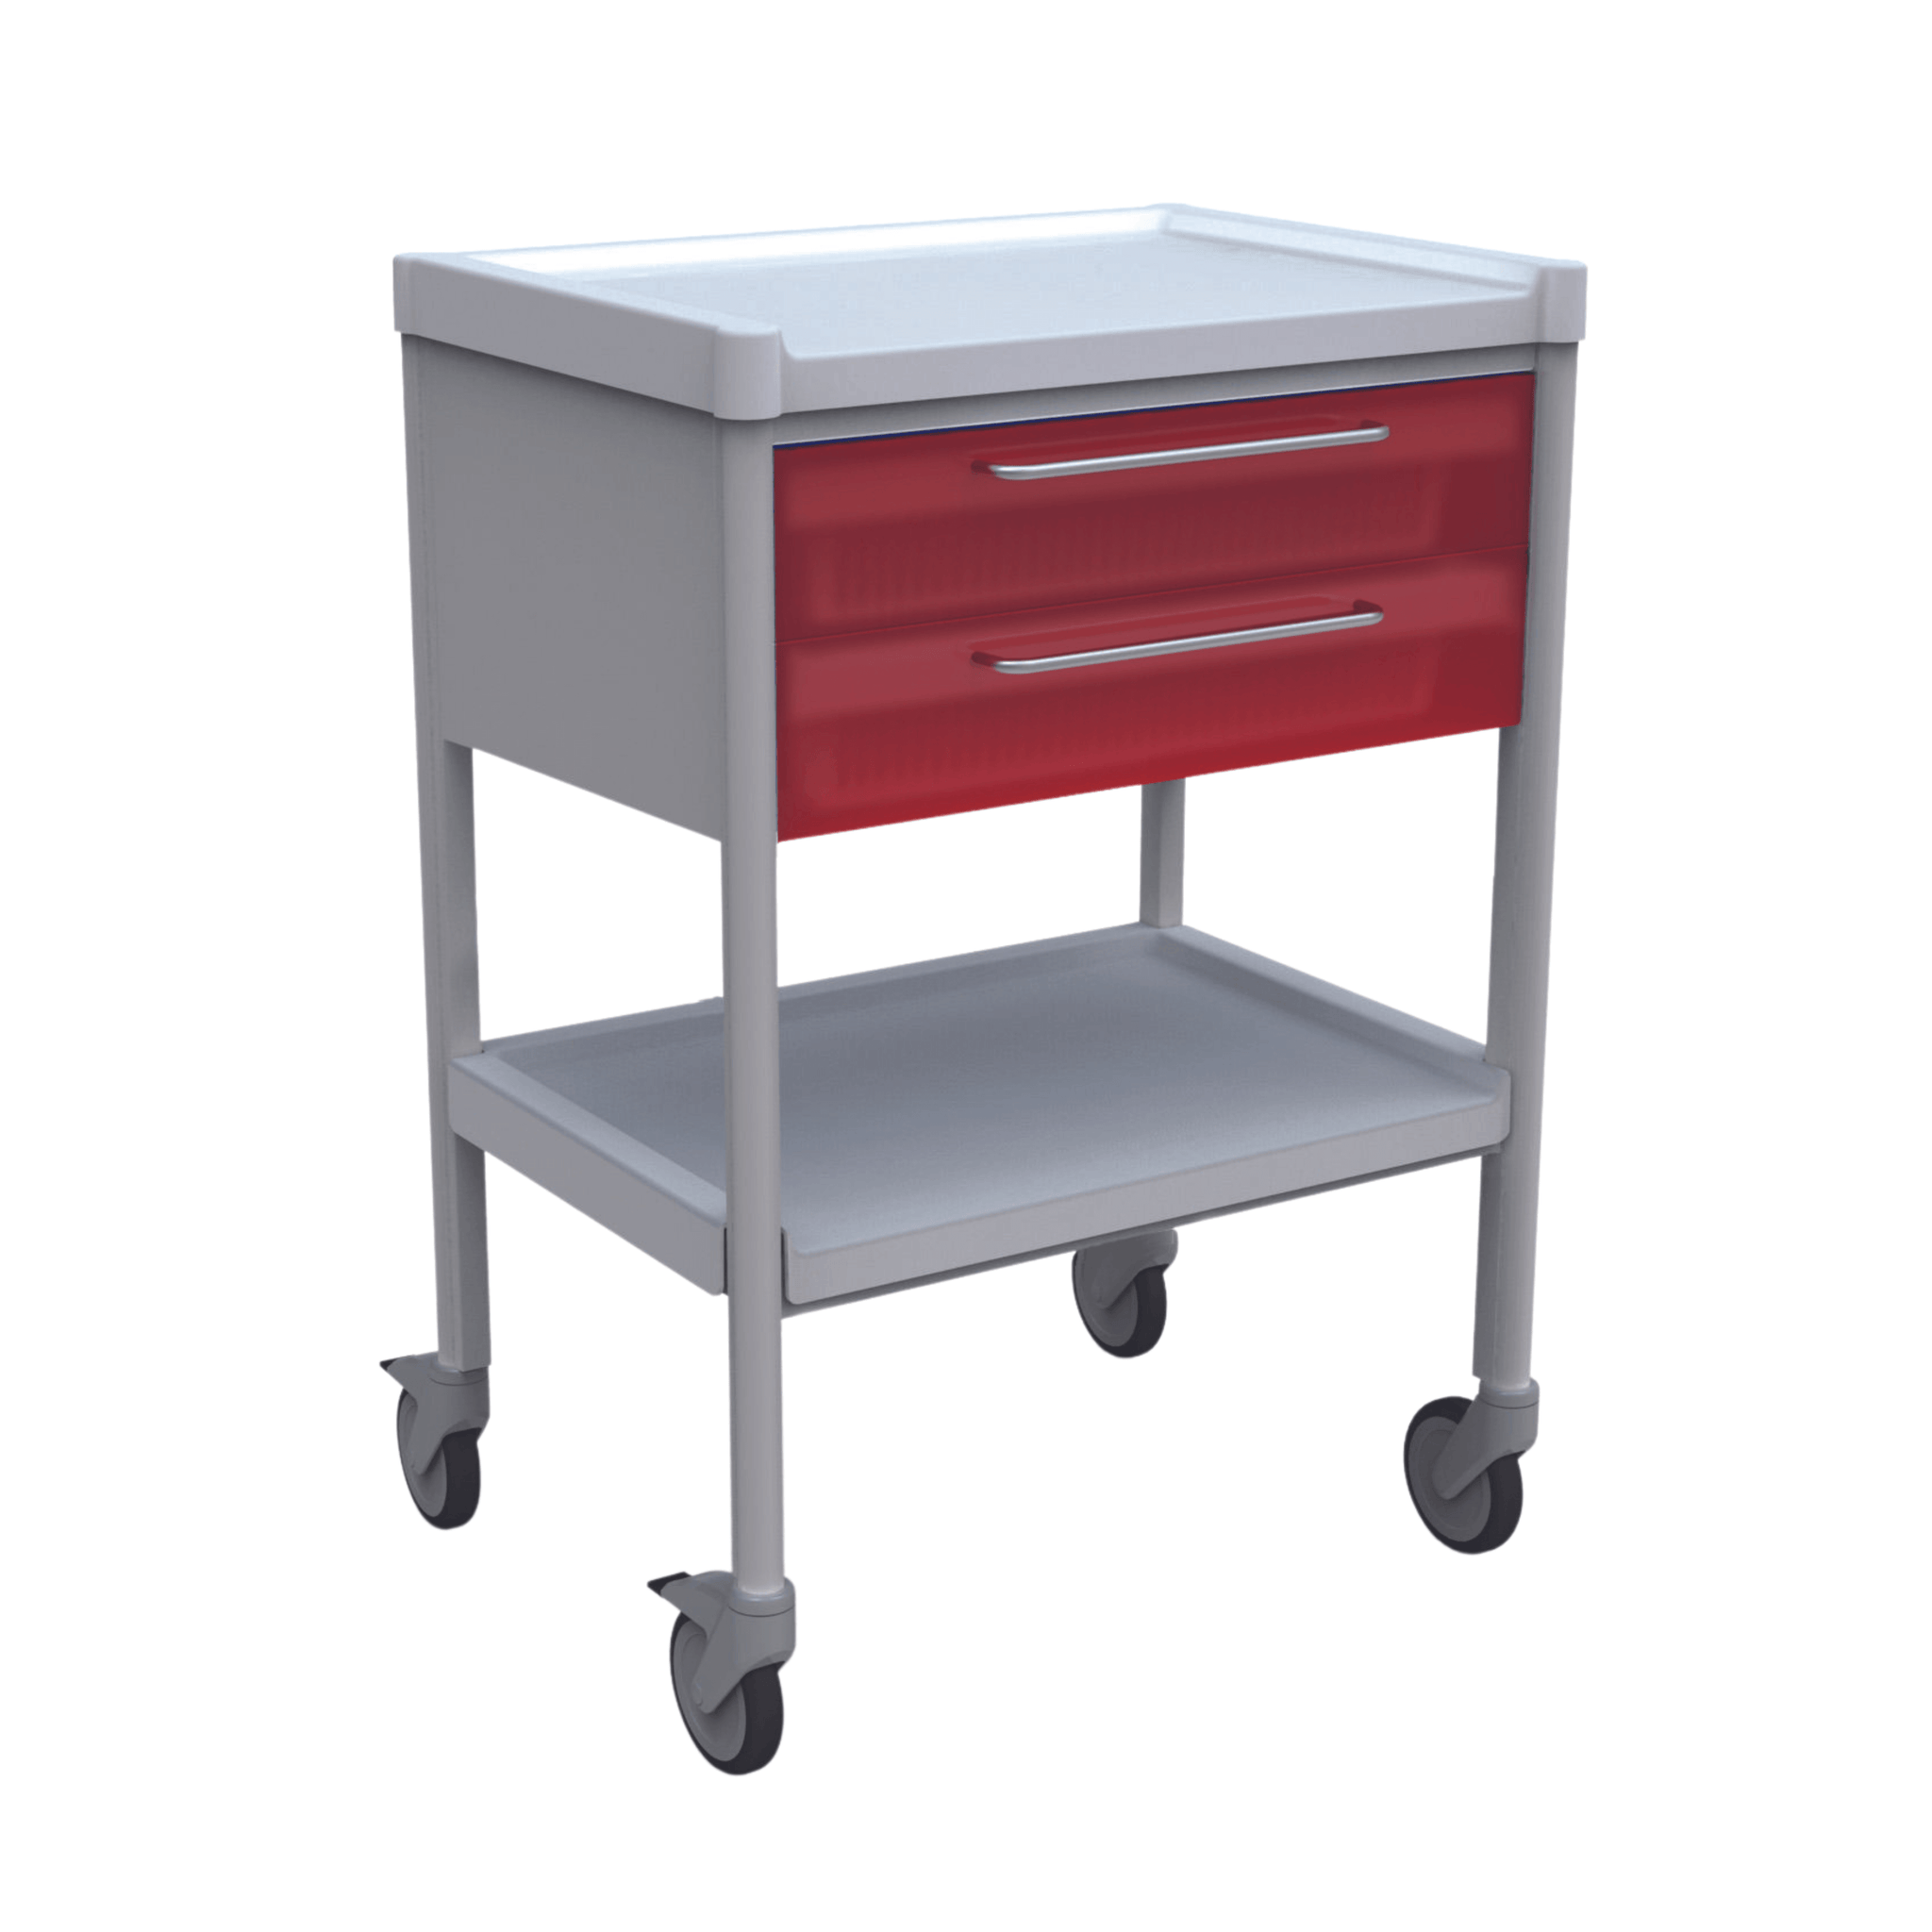 Spectra Cart- 2 Drawer, 700 X 500 X 1000 mm, Red